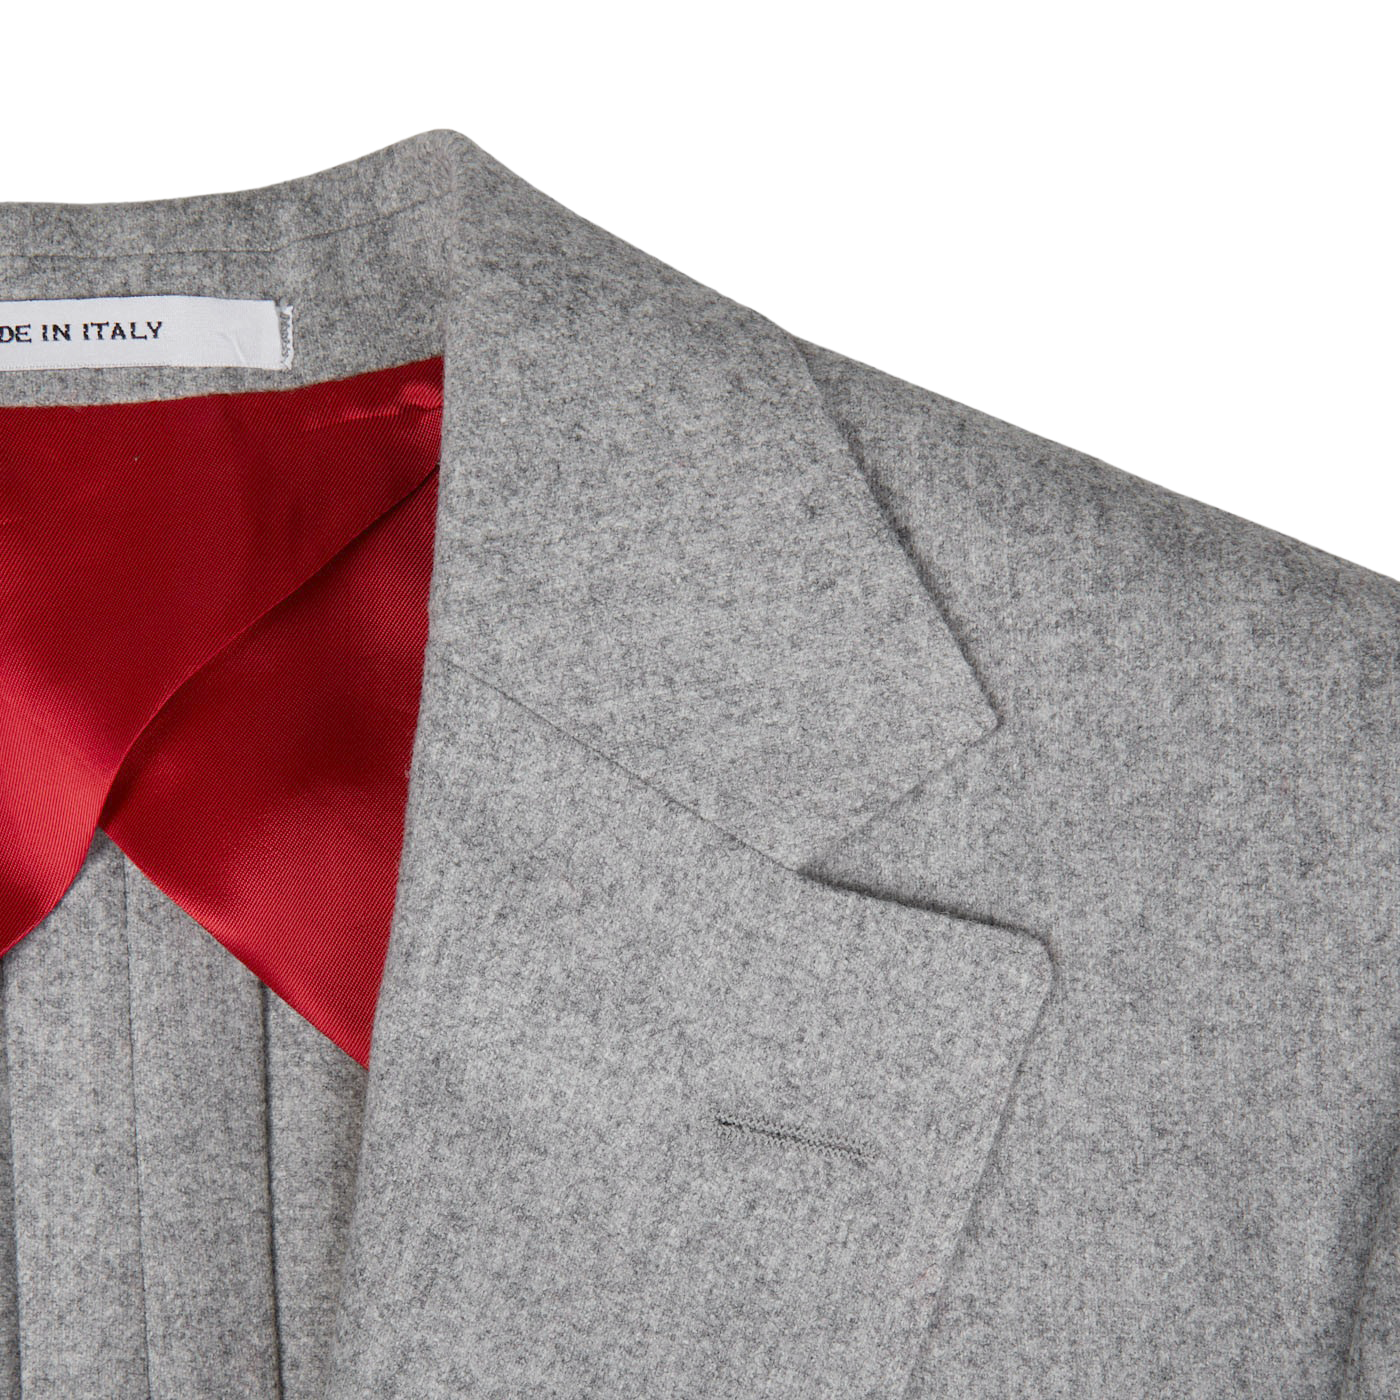 An Alexander Kraft Monte Carlo Light Grey VBC Wool Flannel Signature Jacket with a red collar, made in Italy.